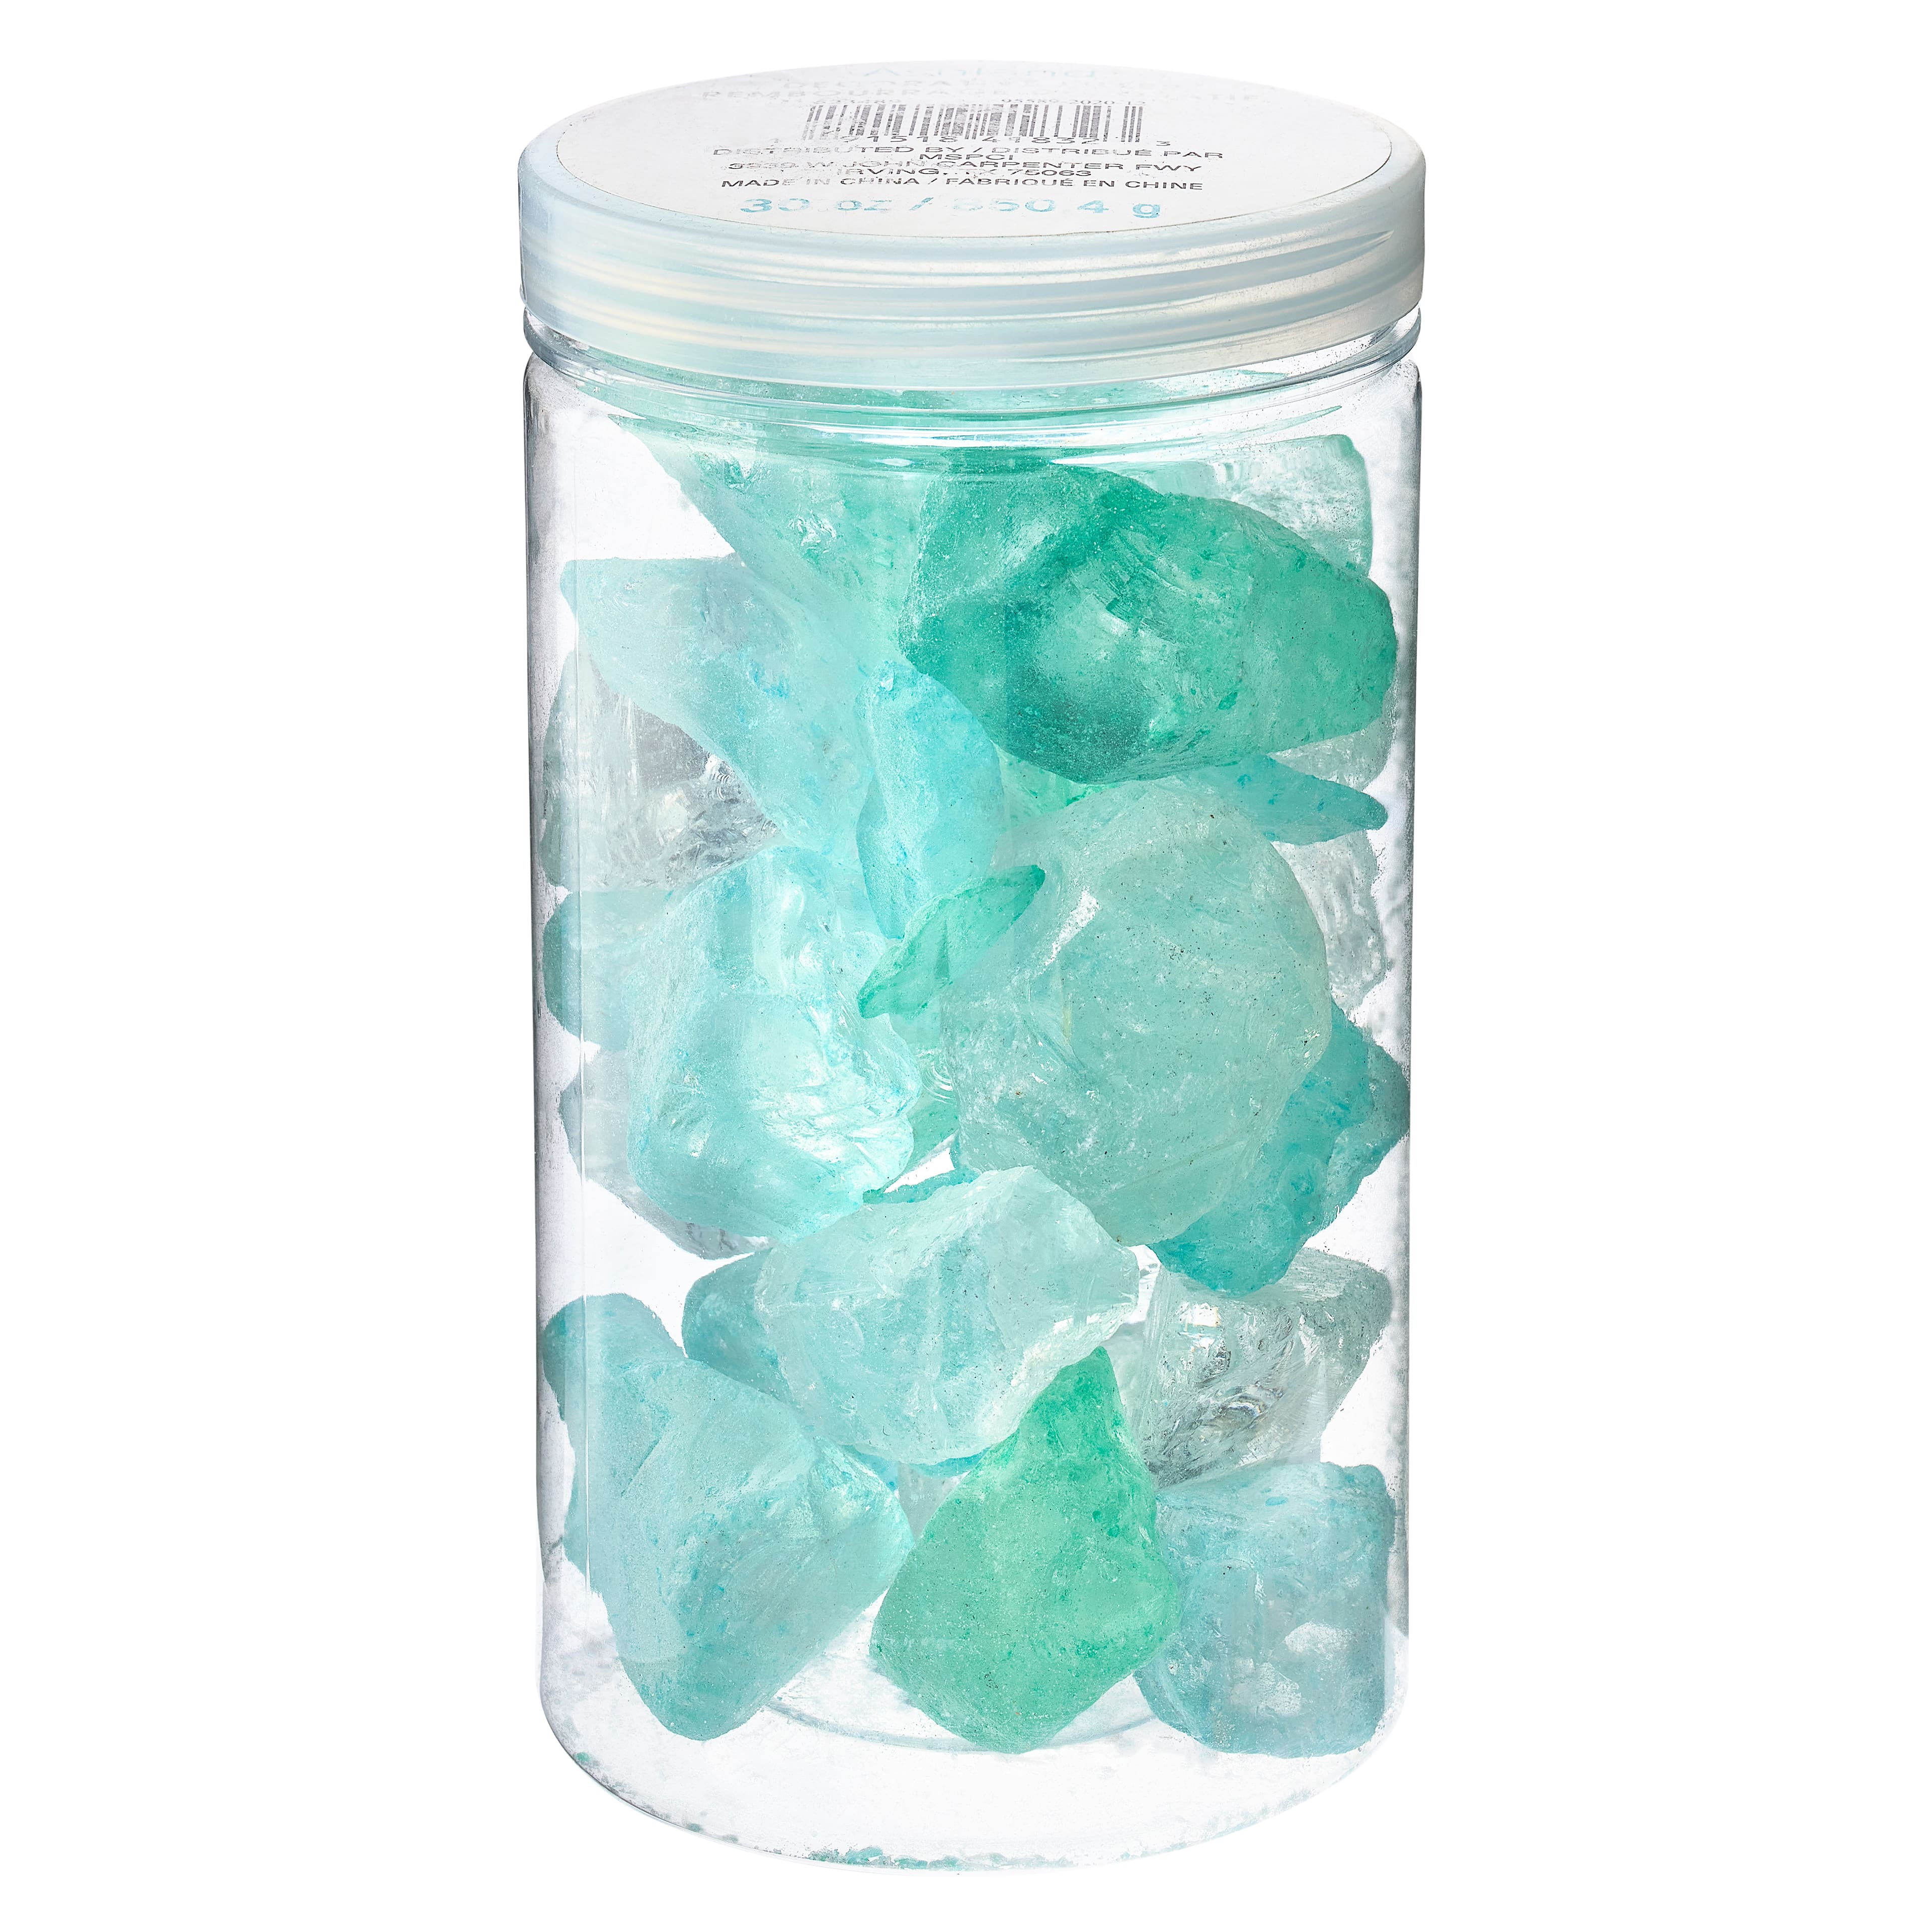 Buy the Clear Ice Cube Filler By Ashland™ at Michaels